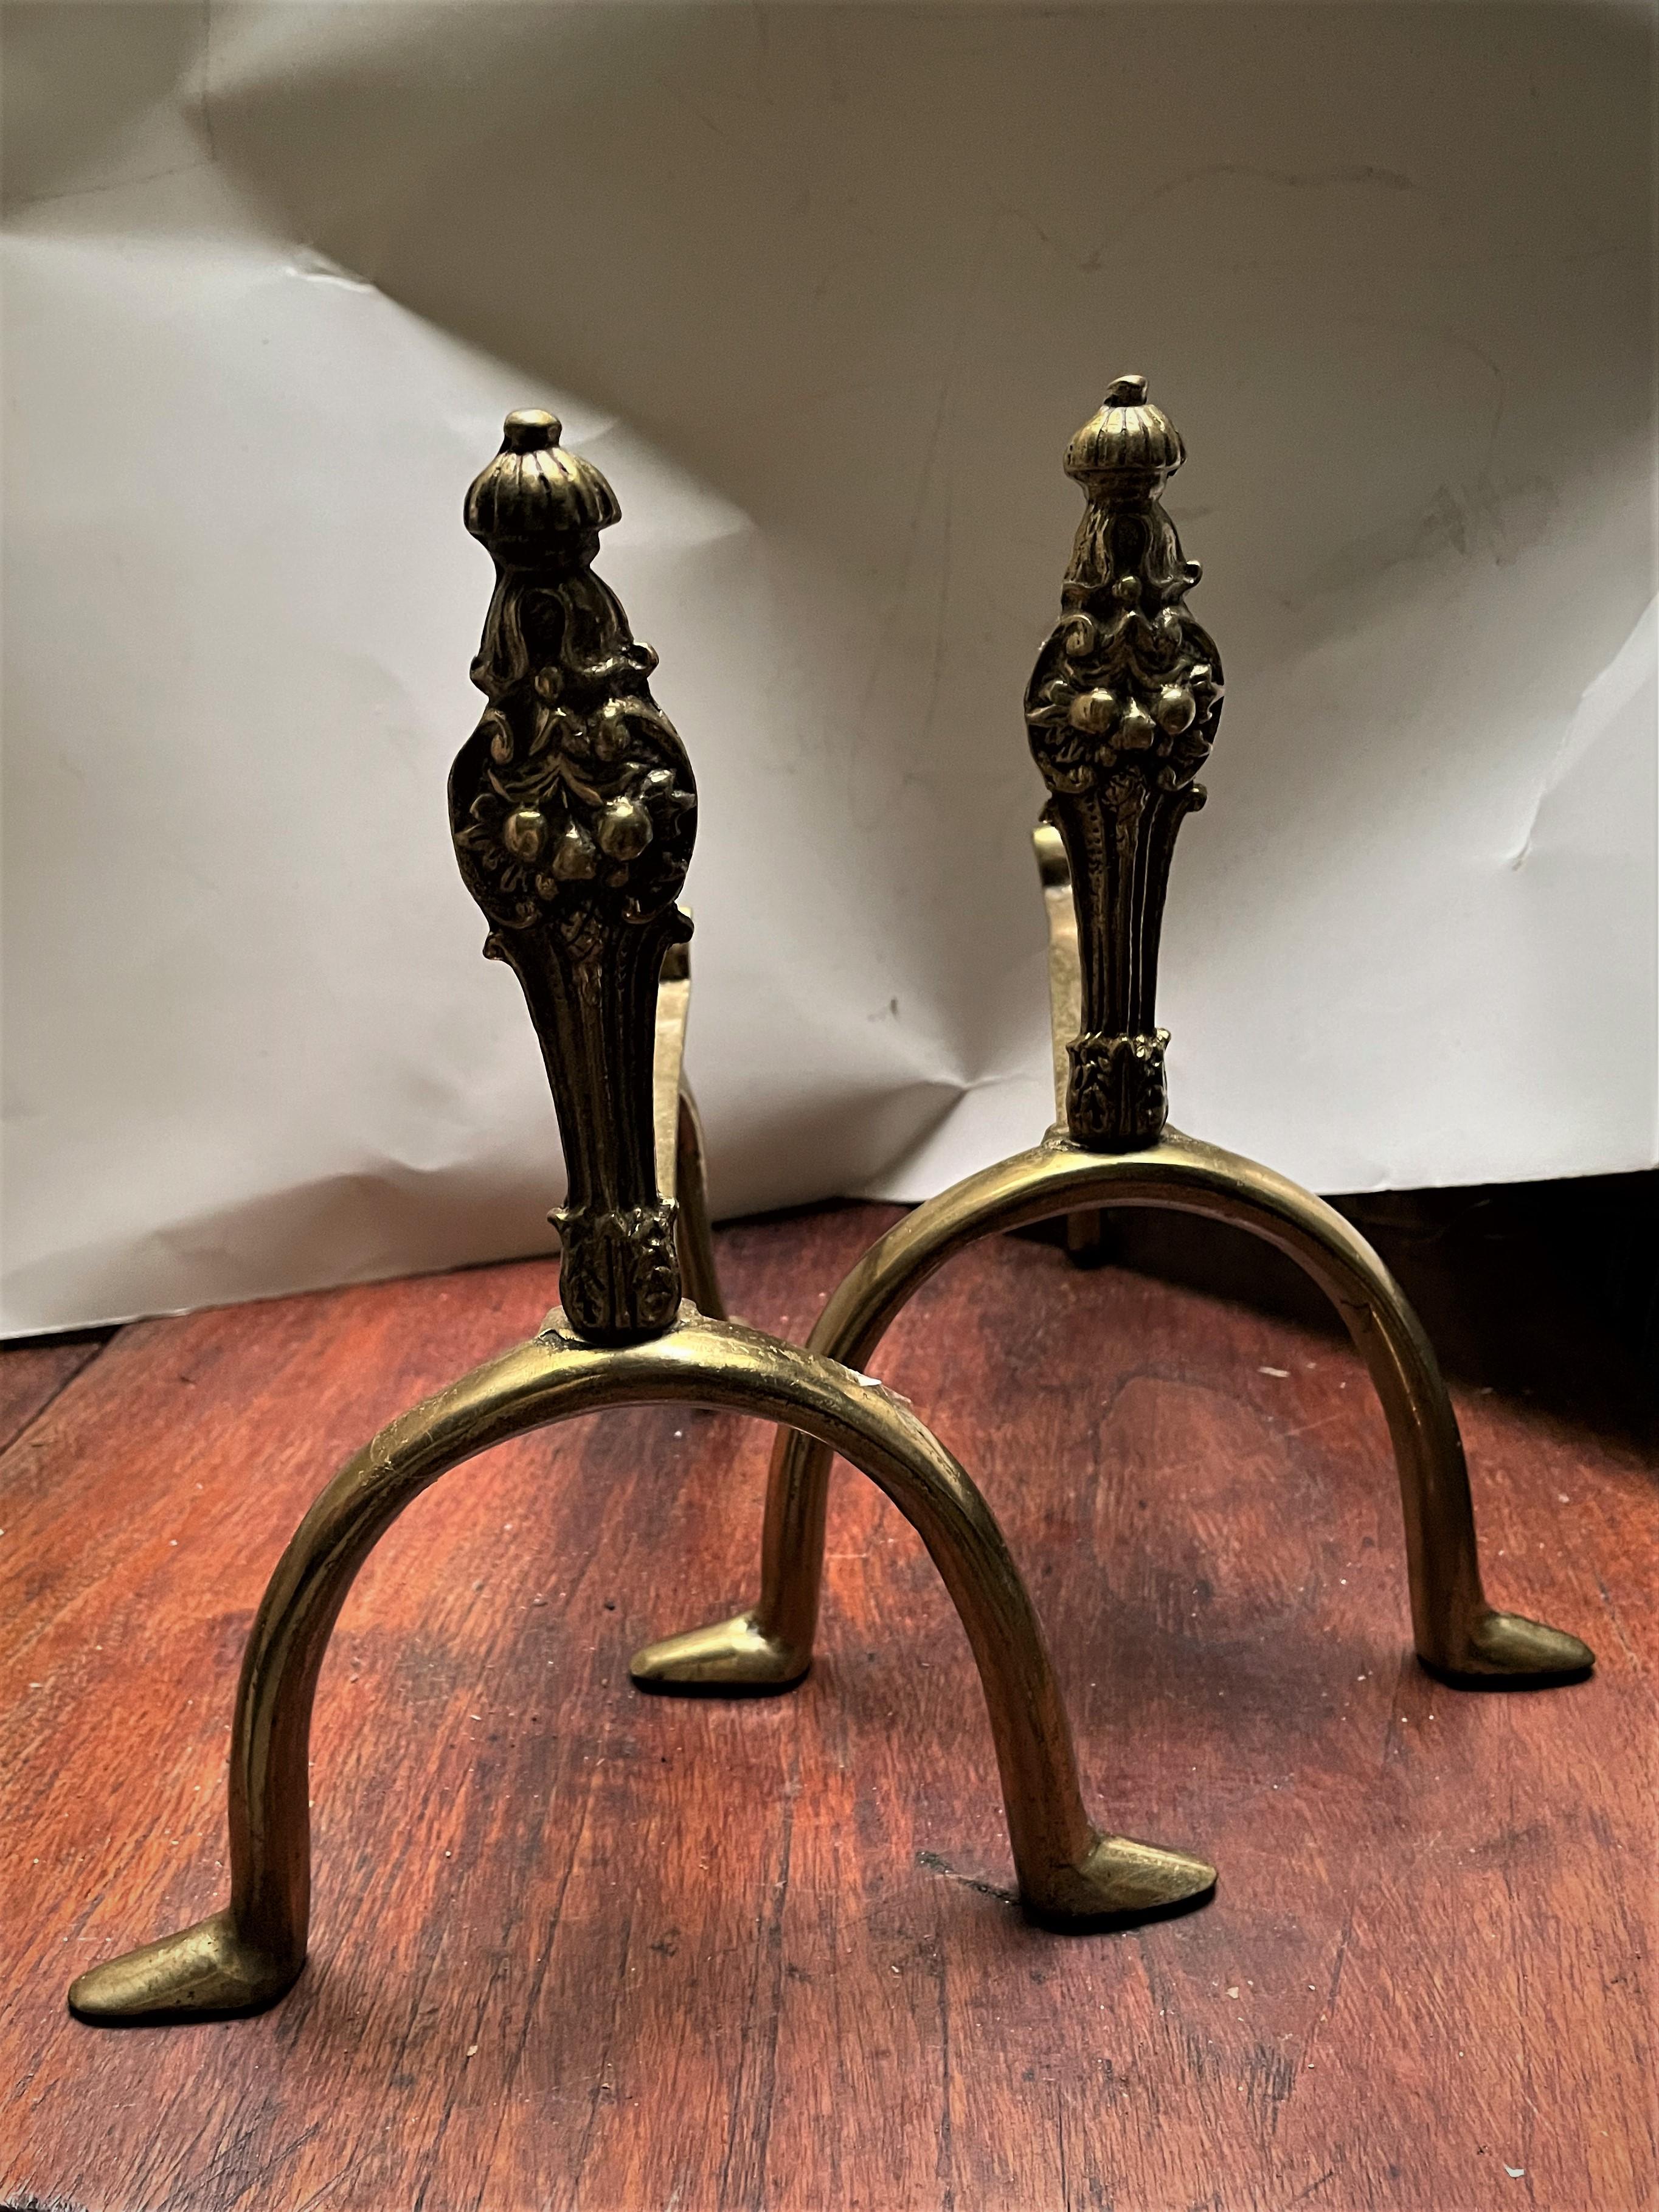 This is an exceptionally sweet pair of very small cast brass andirons. The plinth consists of acanthus leaves which raise to a decorative fruit grouping topped with a bell flower. The semi circle legs have very human looking feet facing sideways and